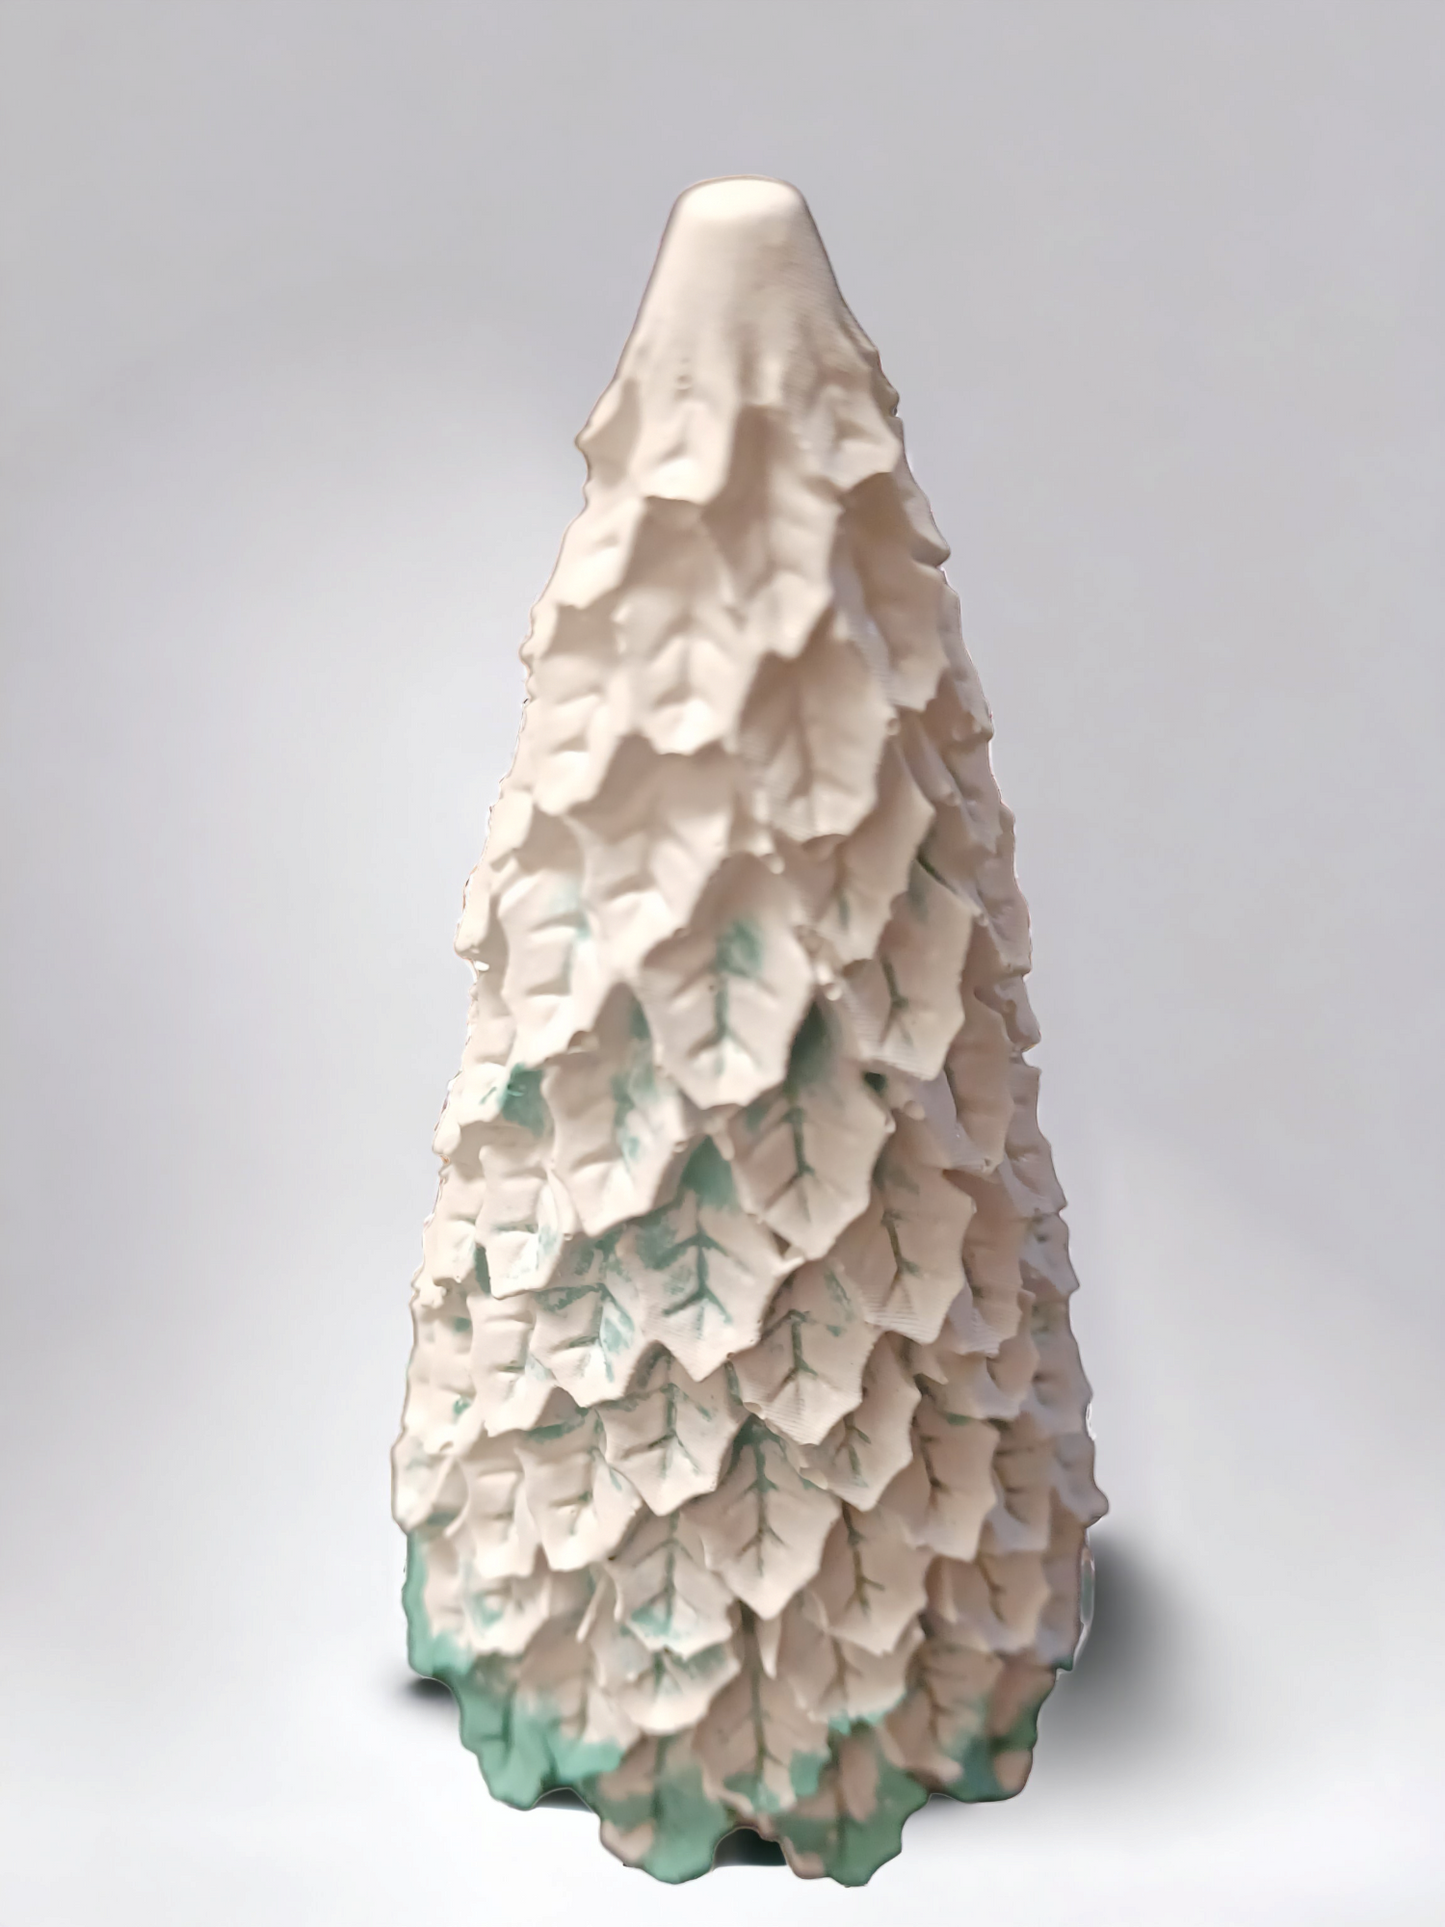 The "Holiday Pine" Handmade, Cement, Rustic Decorative Holiday Tree (Type C)